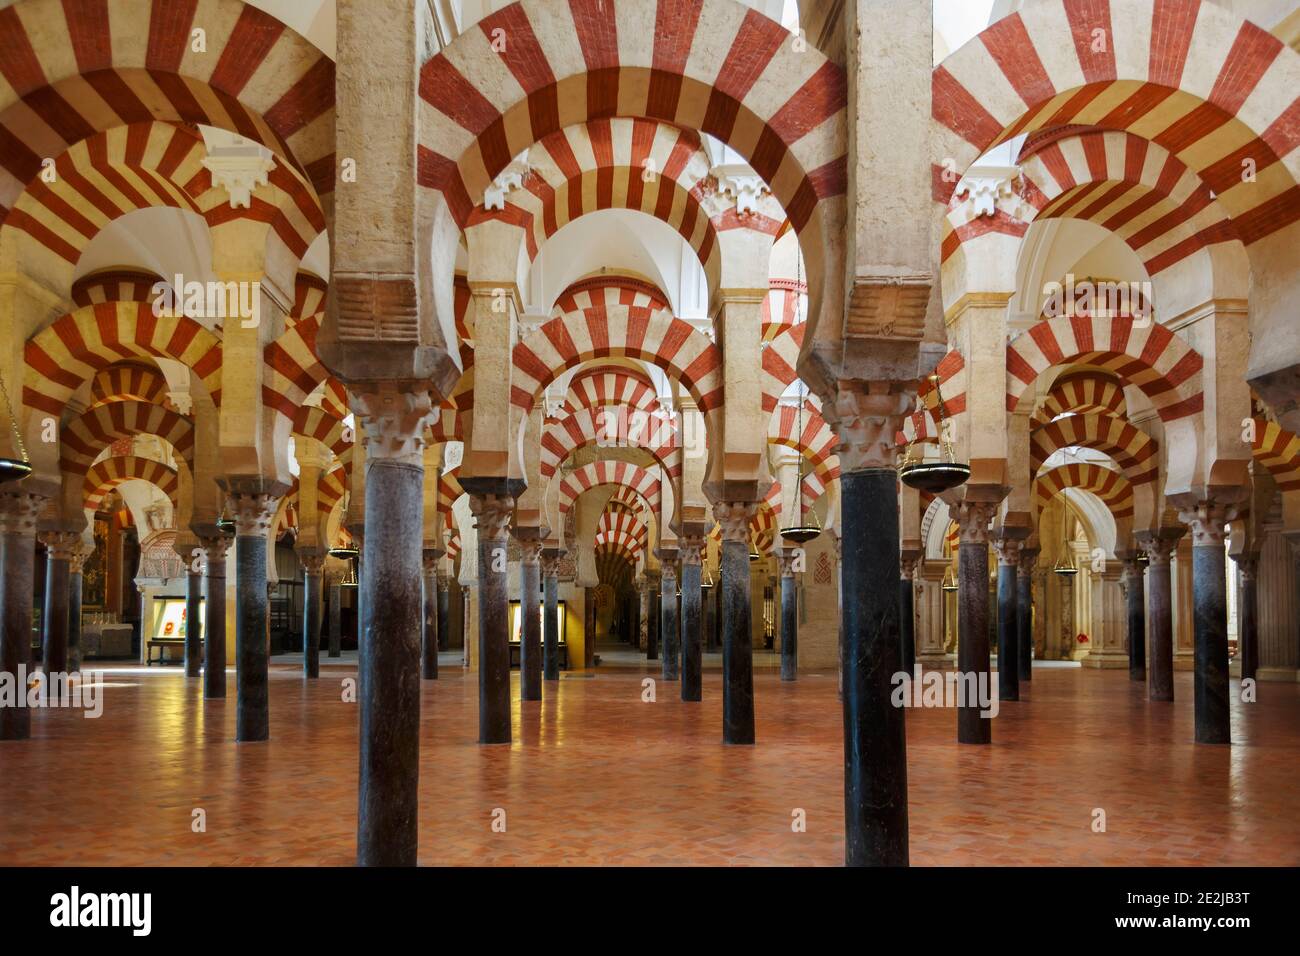 Cordoba, Cordoba Province, Andalusia, southern Spain.  Interior of the Great Mosque, La Mezquita. The Mosque of Cordoba is a UNESCO World Heritage Sit Stock Photo